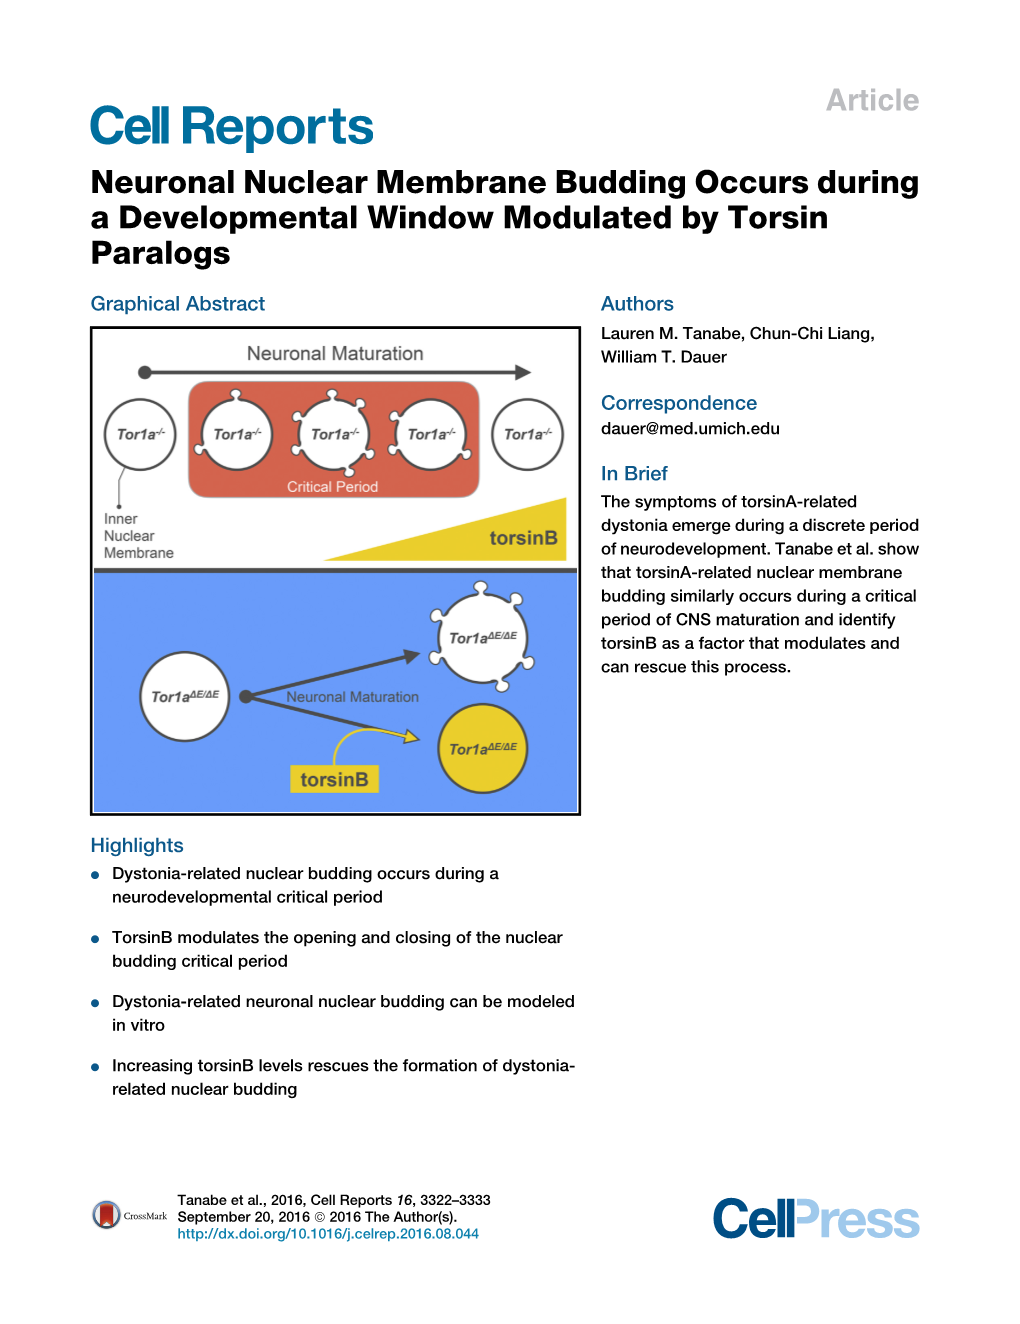 Neuronal Nuclear Membrane Budding Occurs During a Developmental Window Modulated by Torsin Paralogs